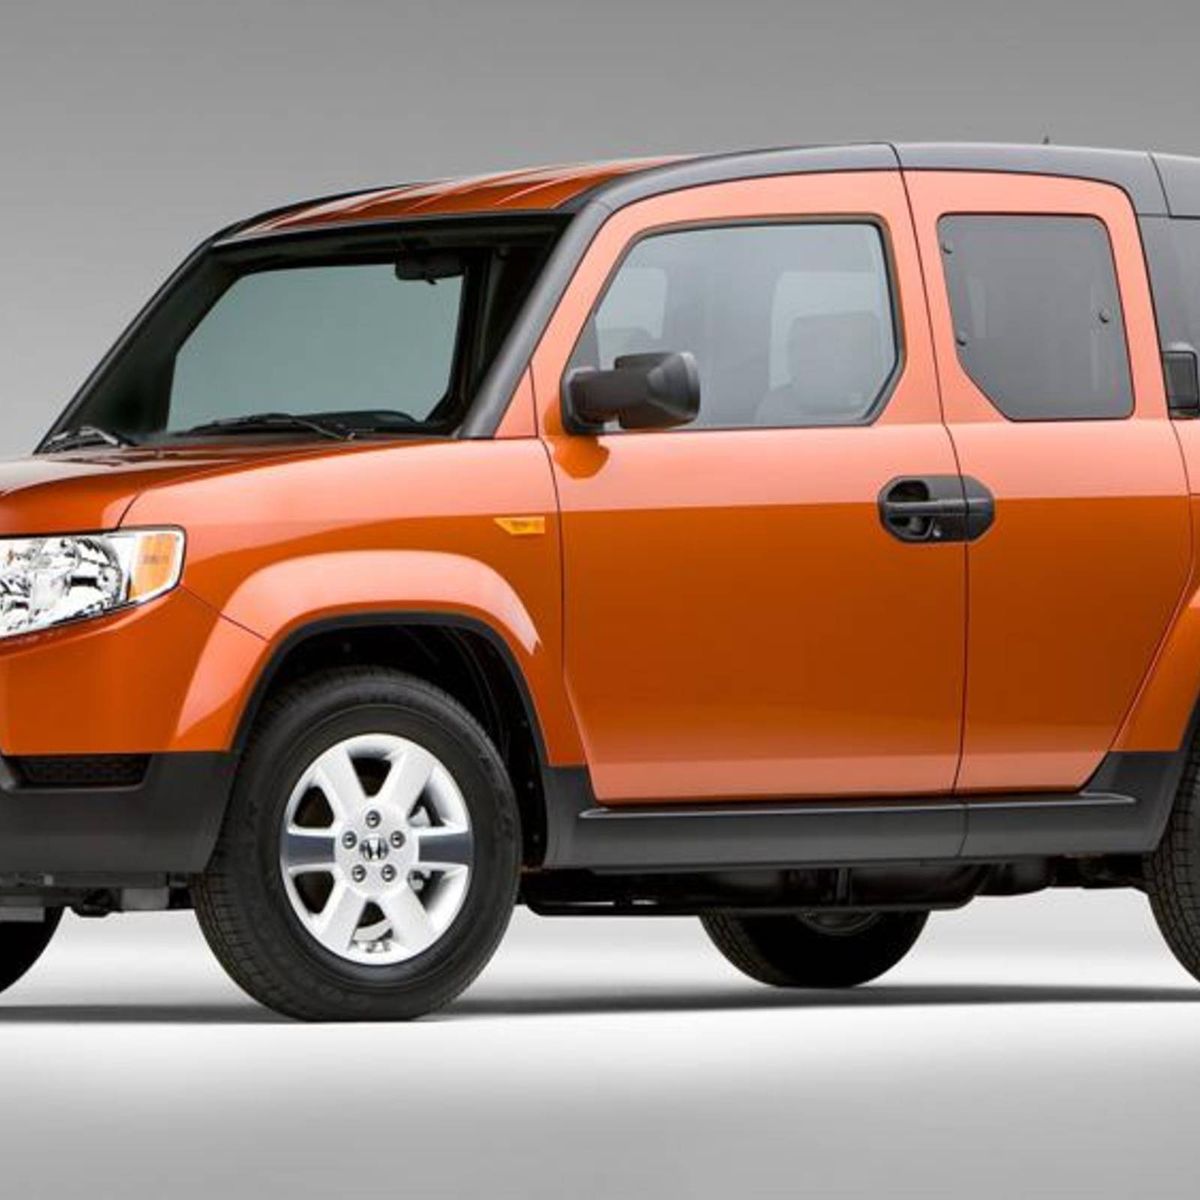 Honda Element production to end